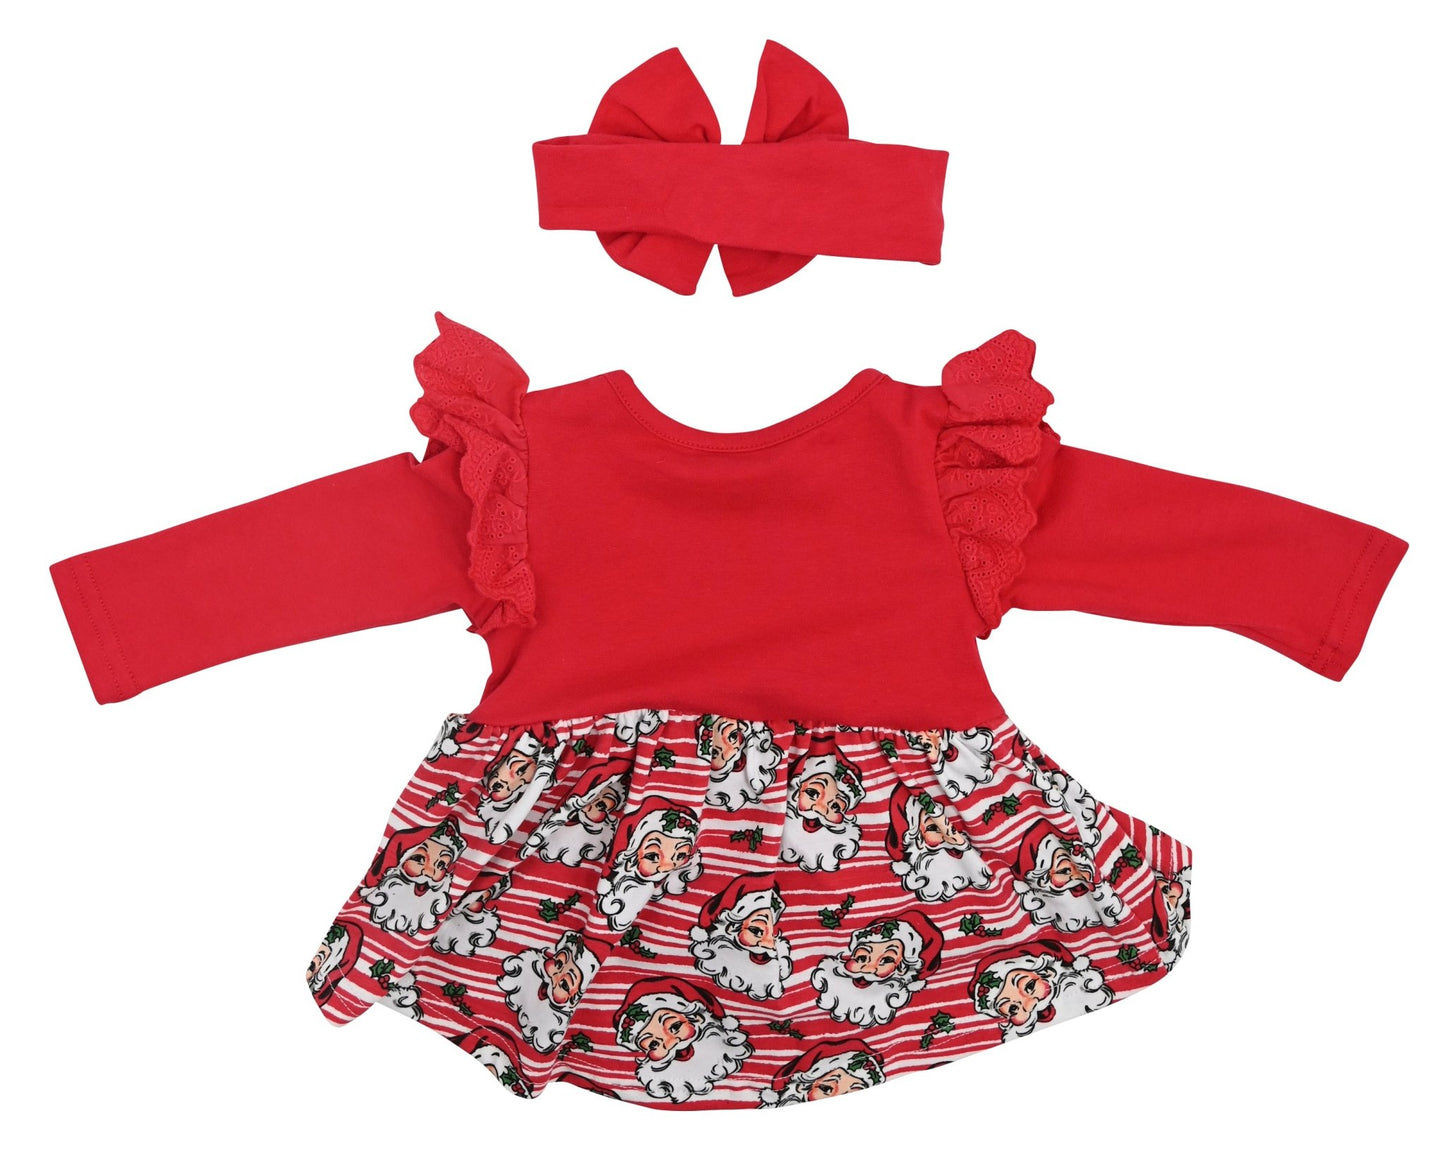 Baby Girl's Christmas Santa Dress with Ruffle Sleeves and Matching Headband - Festive Red Outfit - Sizes NB to 24M - Unique Baby Shop - Christmas